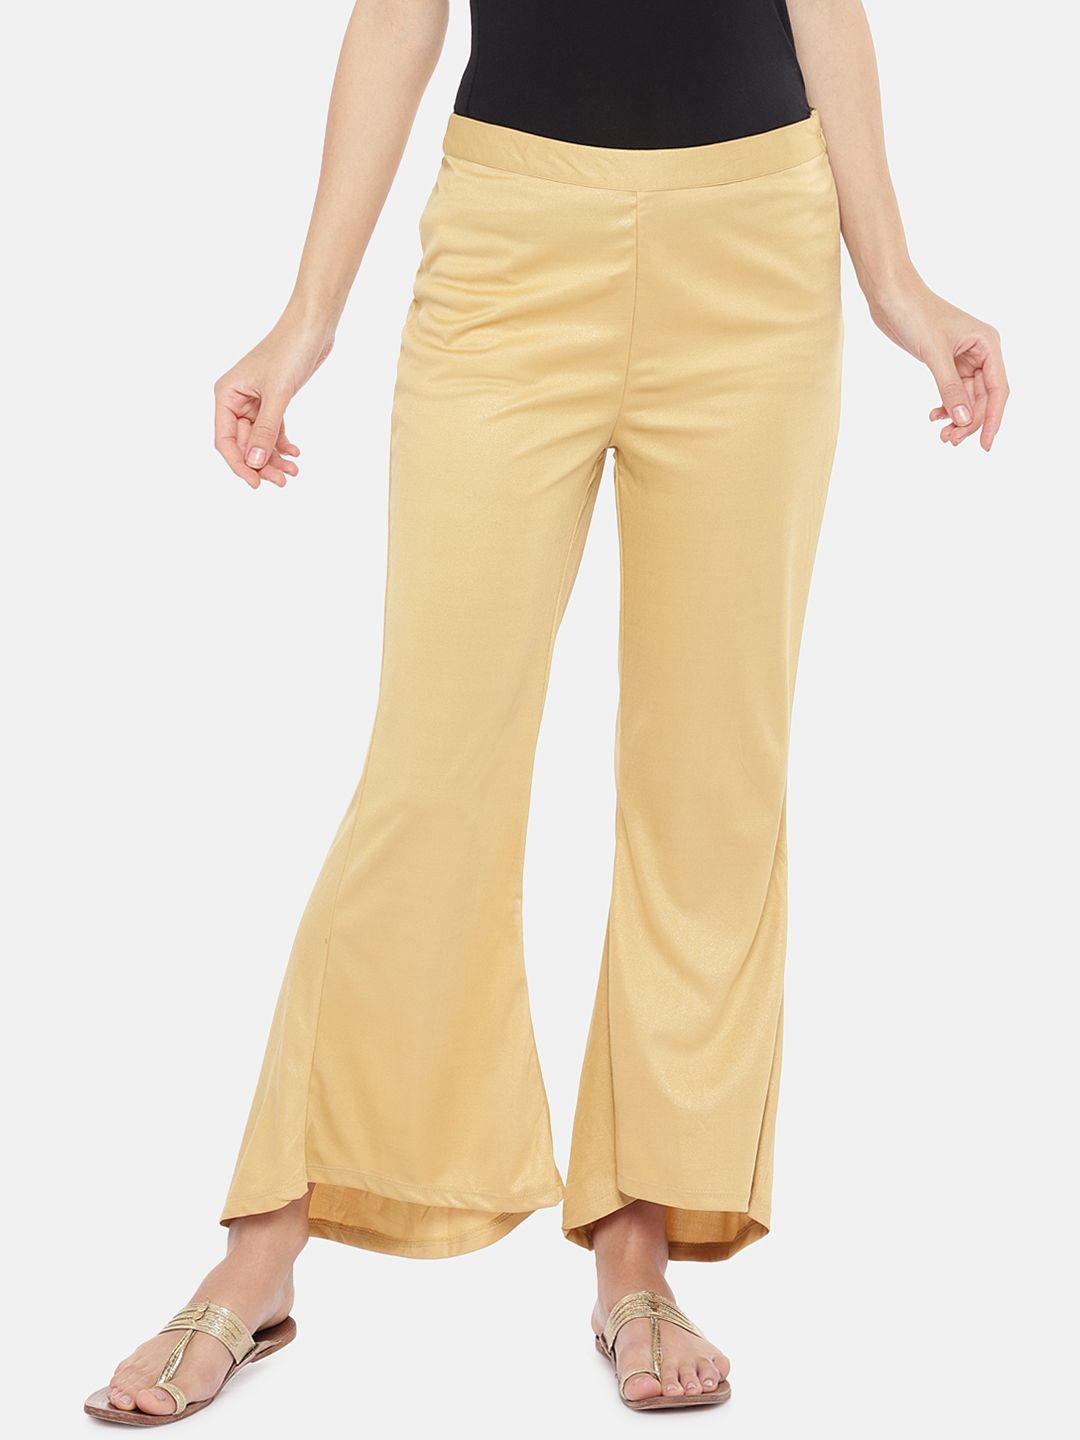 globus women gold-toned slim fit solid bootcut trousers